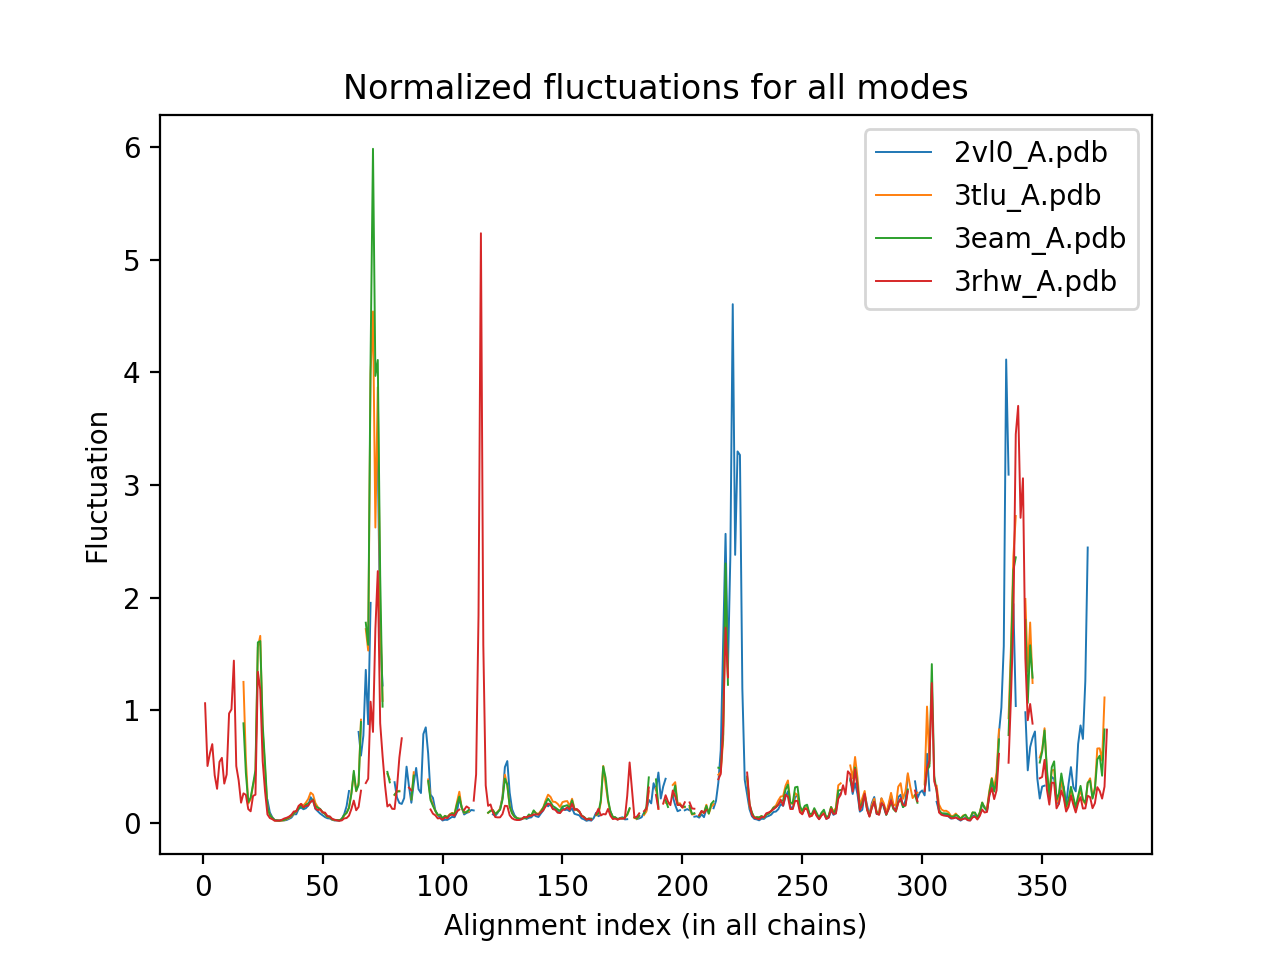 onechain_GLICs.fasta_fluctuations.png